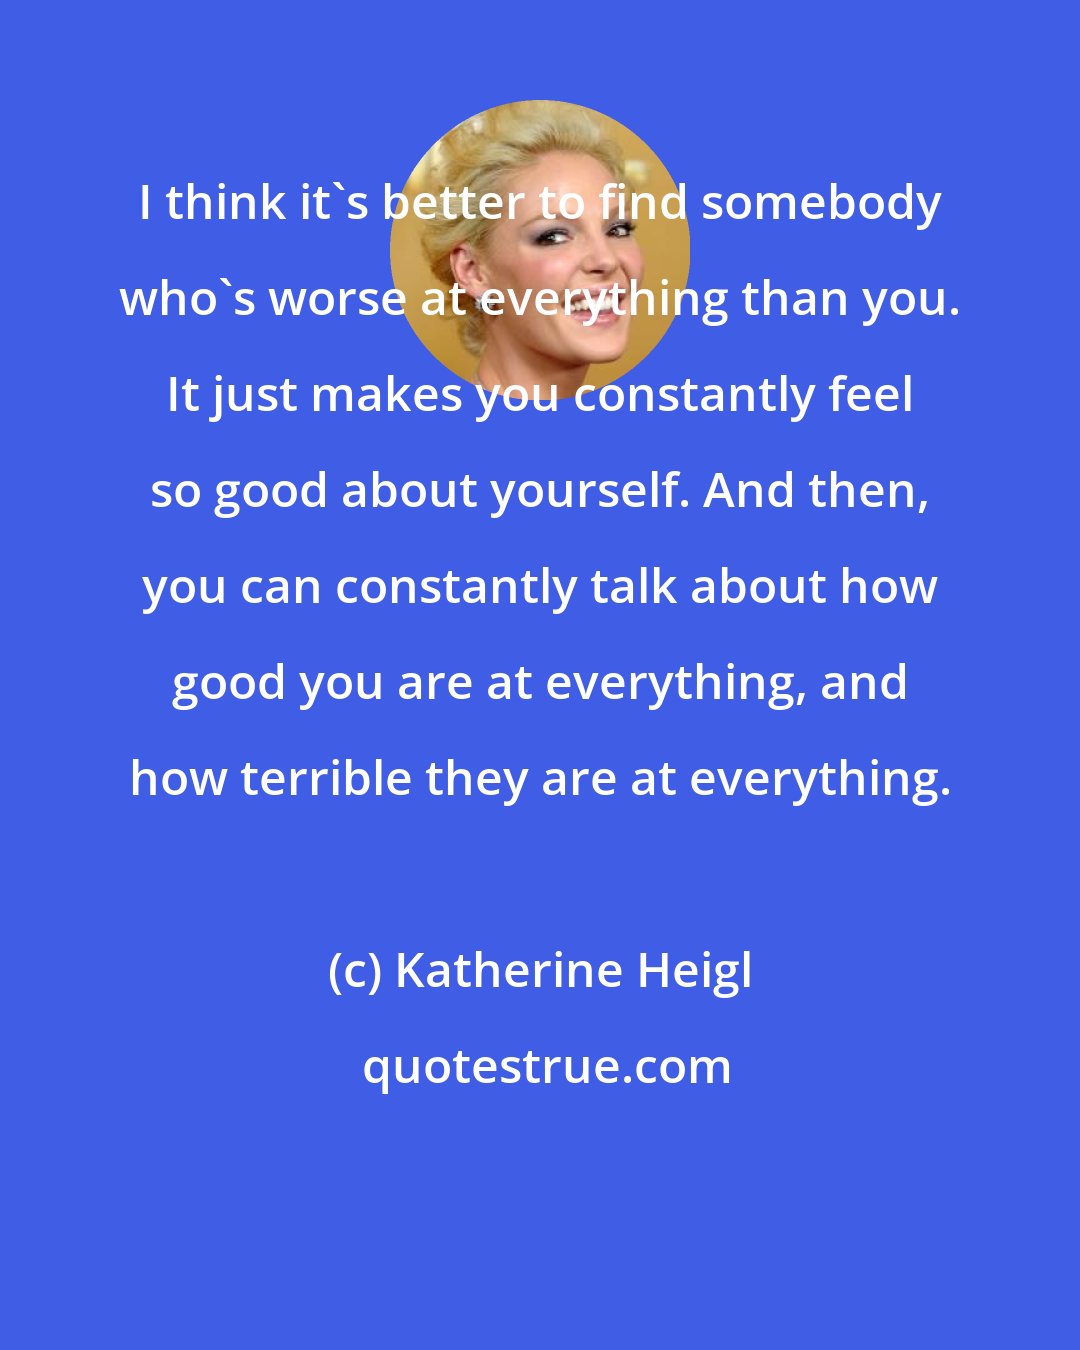 Katherine Heigl: I think it's better to find somebody who's worse at everything than you. It just makes you constantly feel so good about yourself. And then, you can constantly talk about how good you are at everything, and how terrible they are at everything.